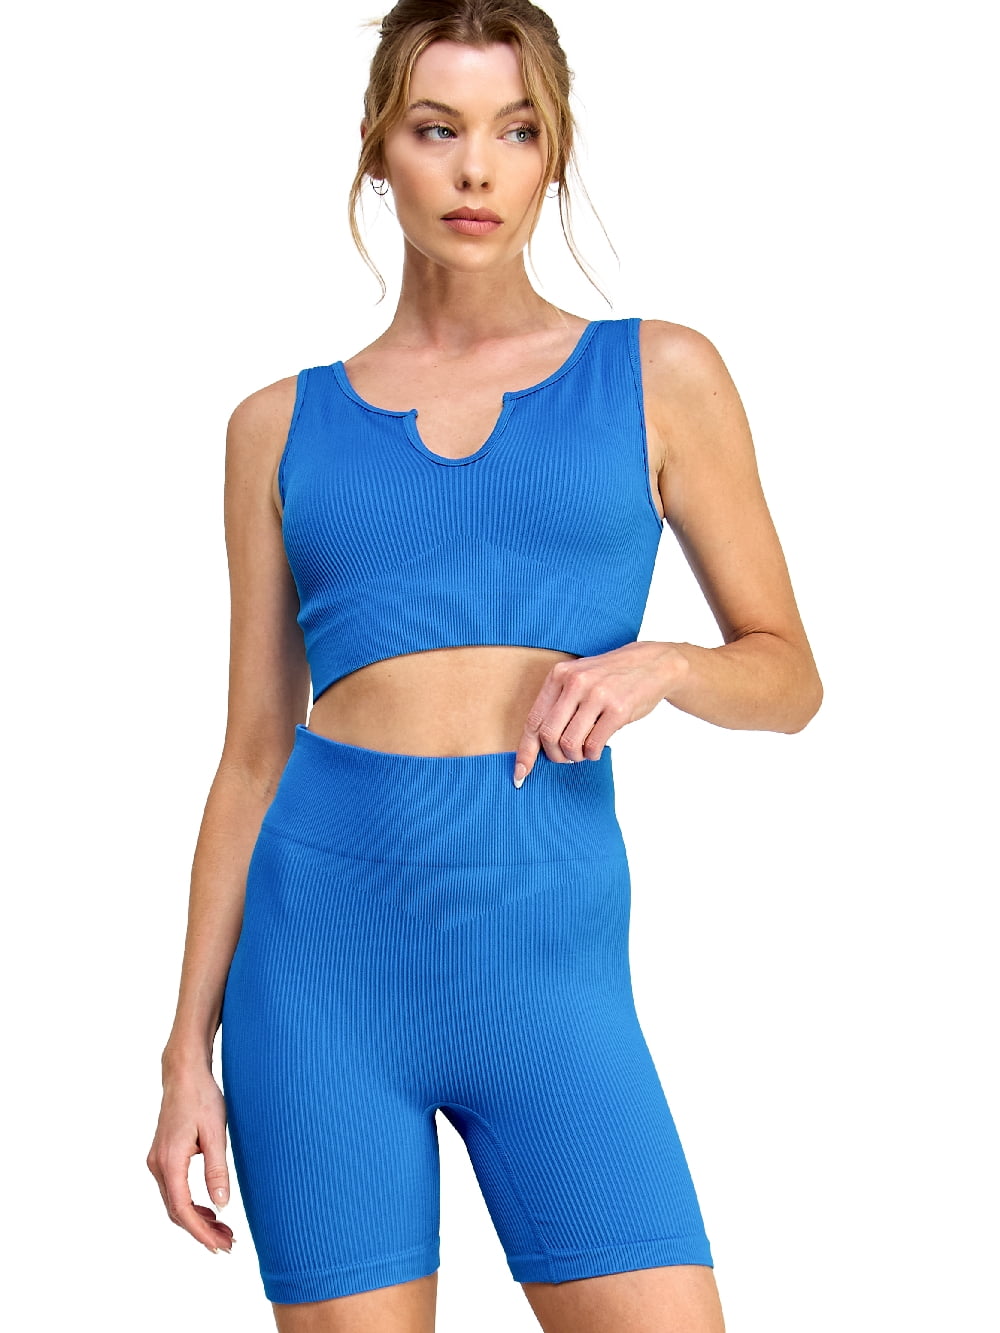 IUUI Workout Sets For Women Matching 2 Piece Summer Outfits Trendy Seamless  Top High Waist Ribbed Short - Large 